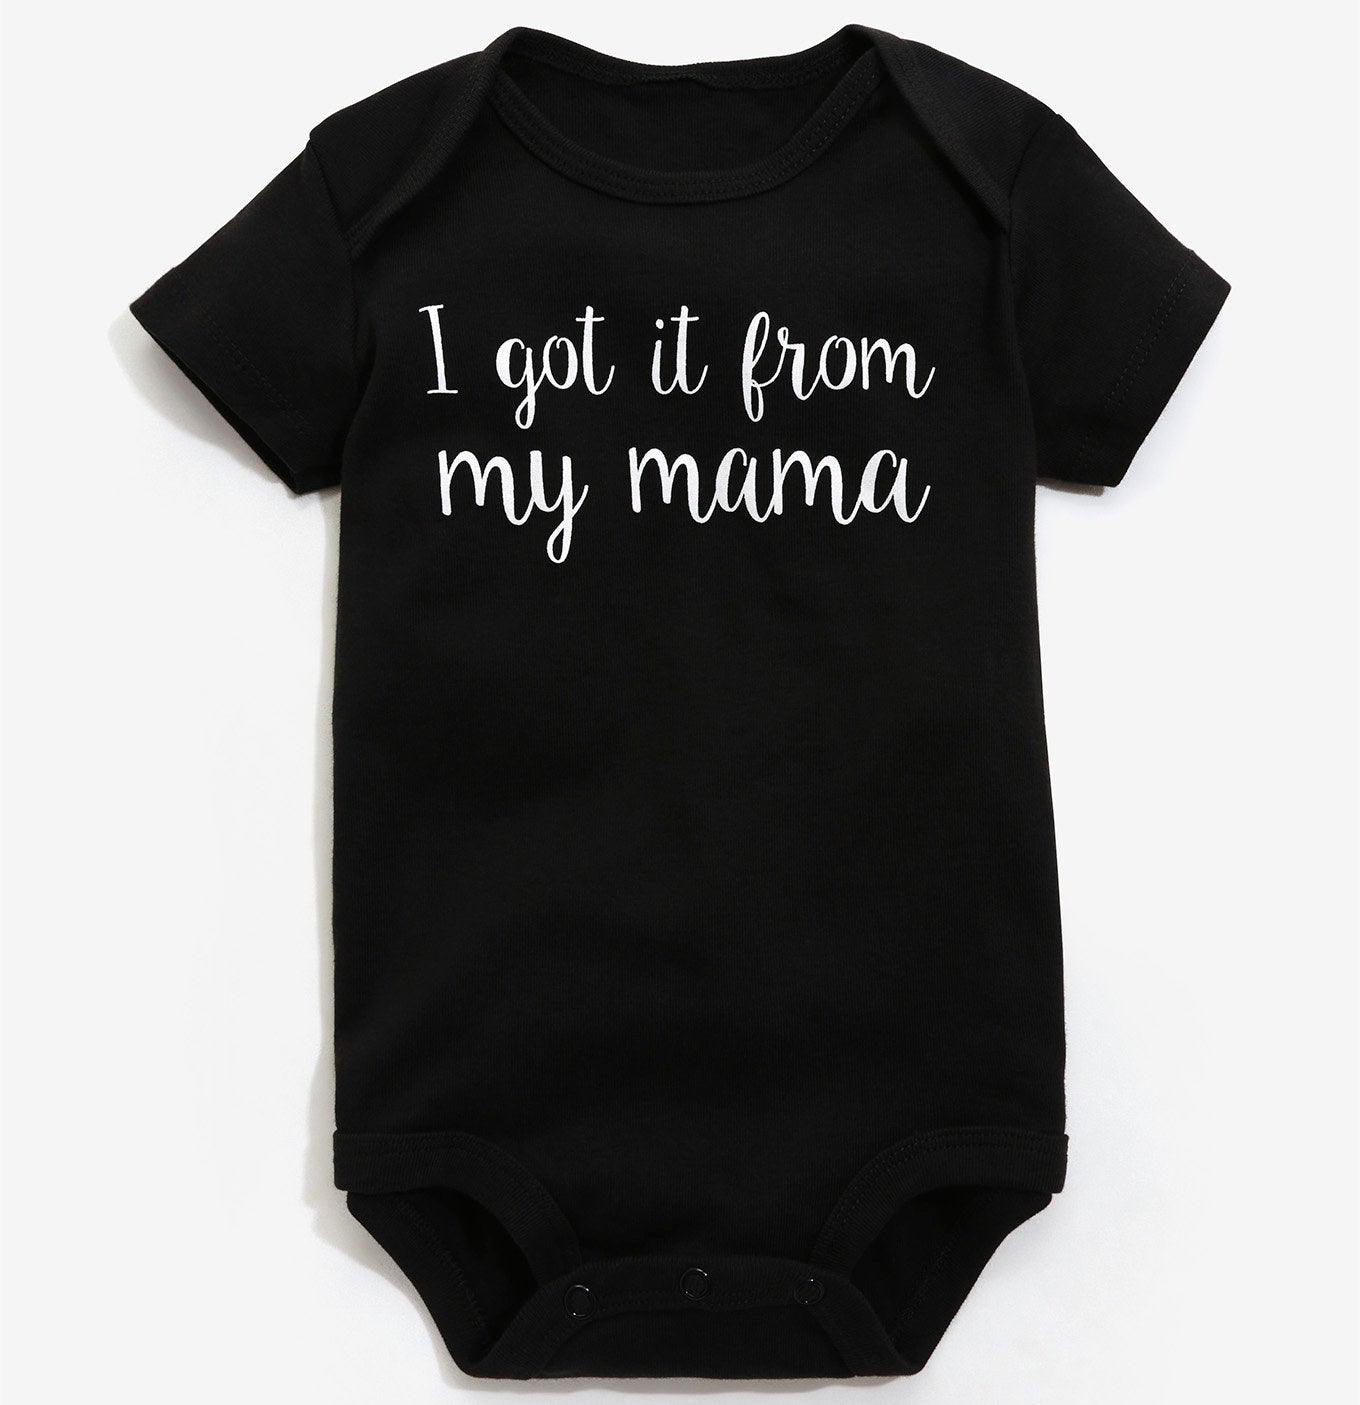 29 Gifts For The Coolest Baby You Know